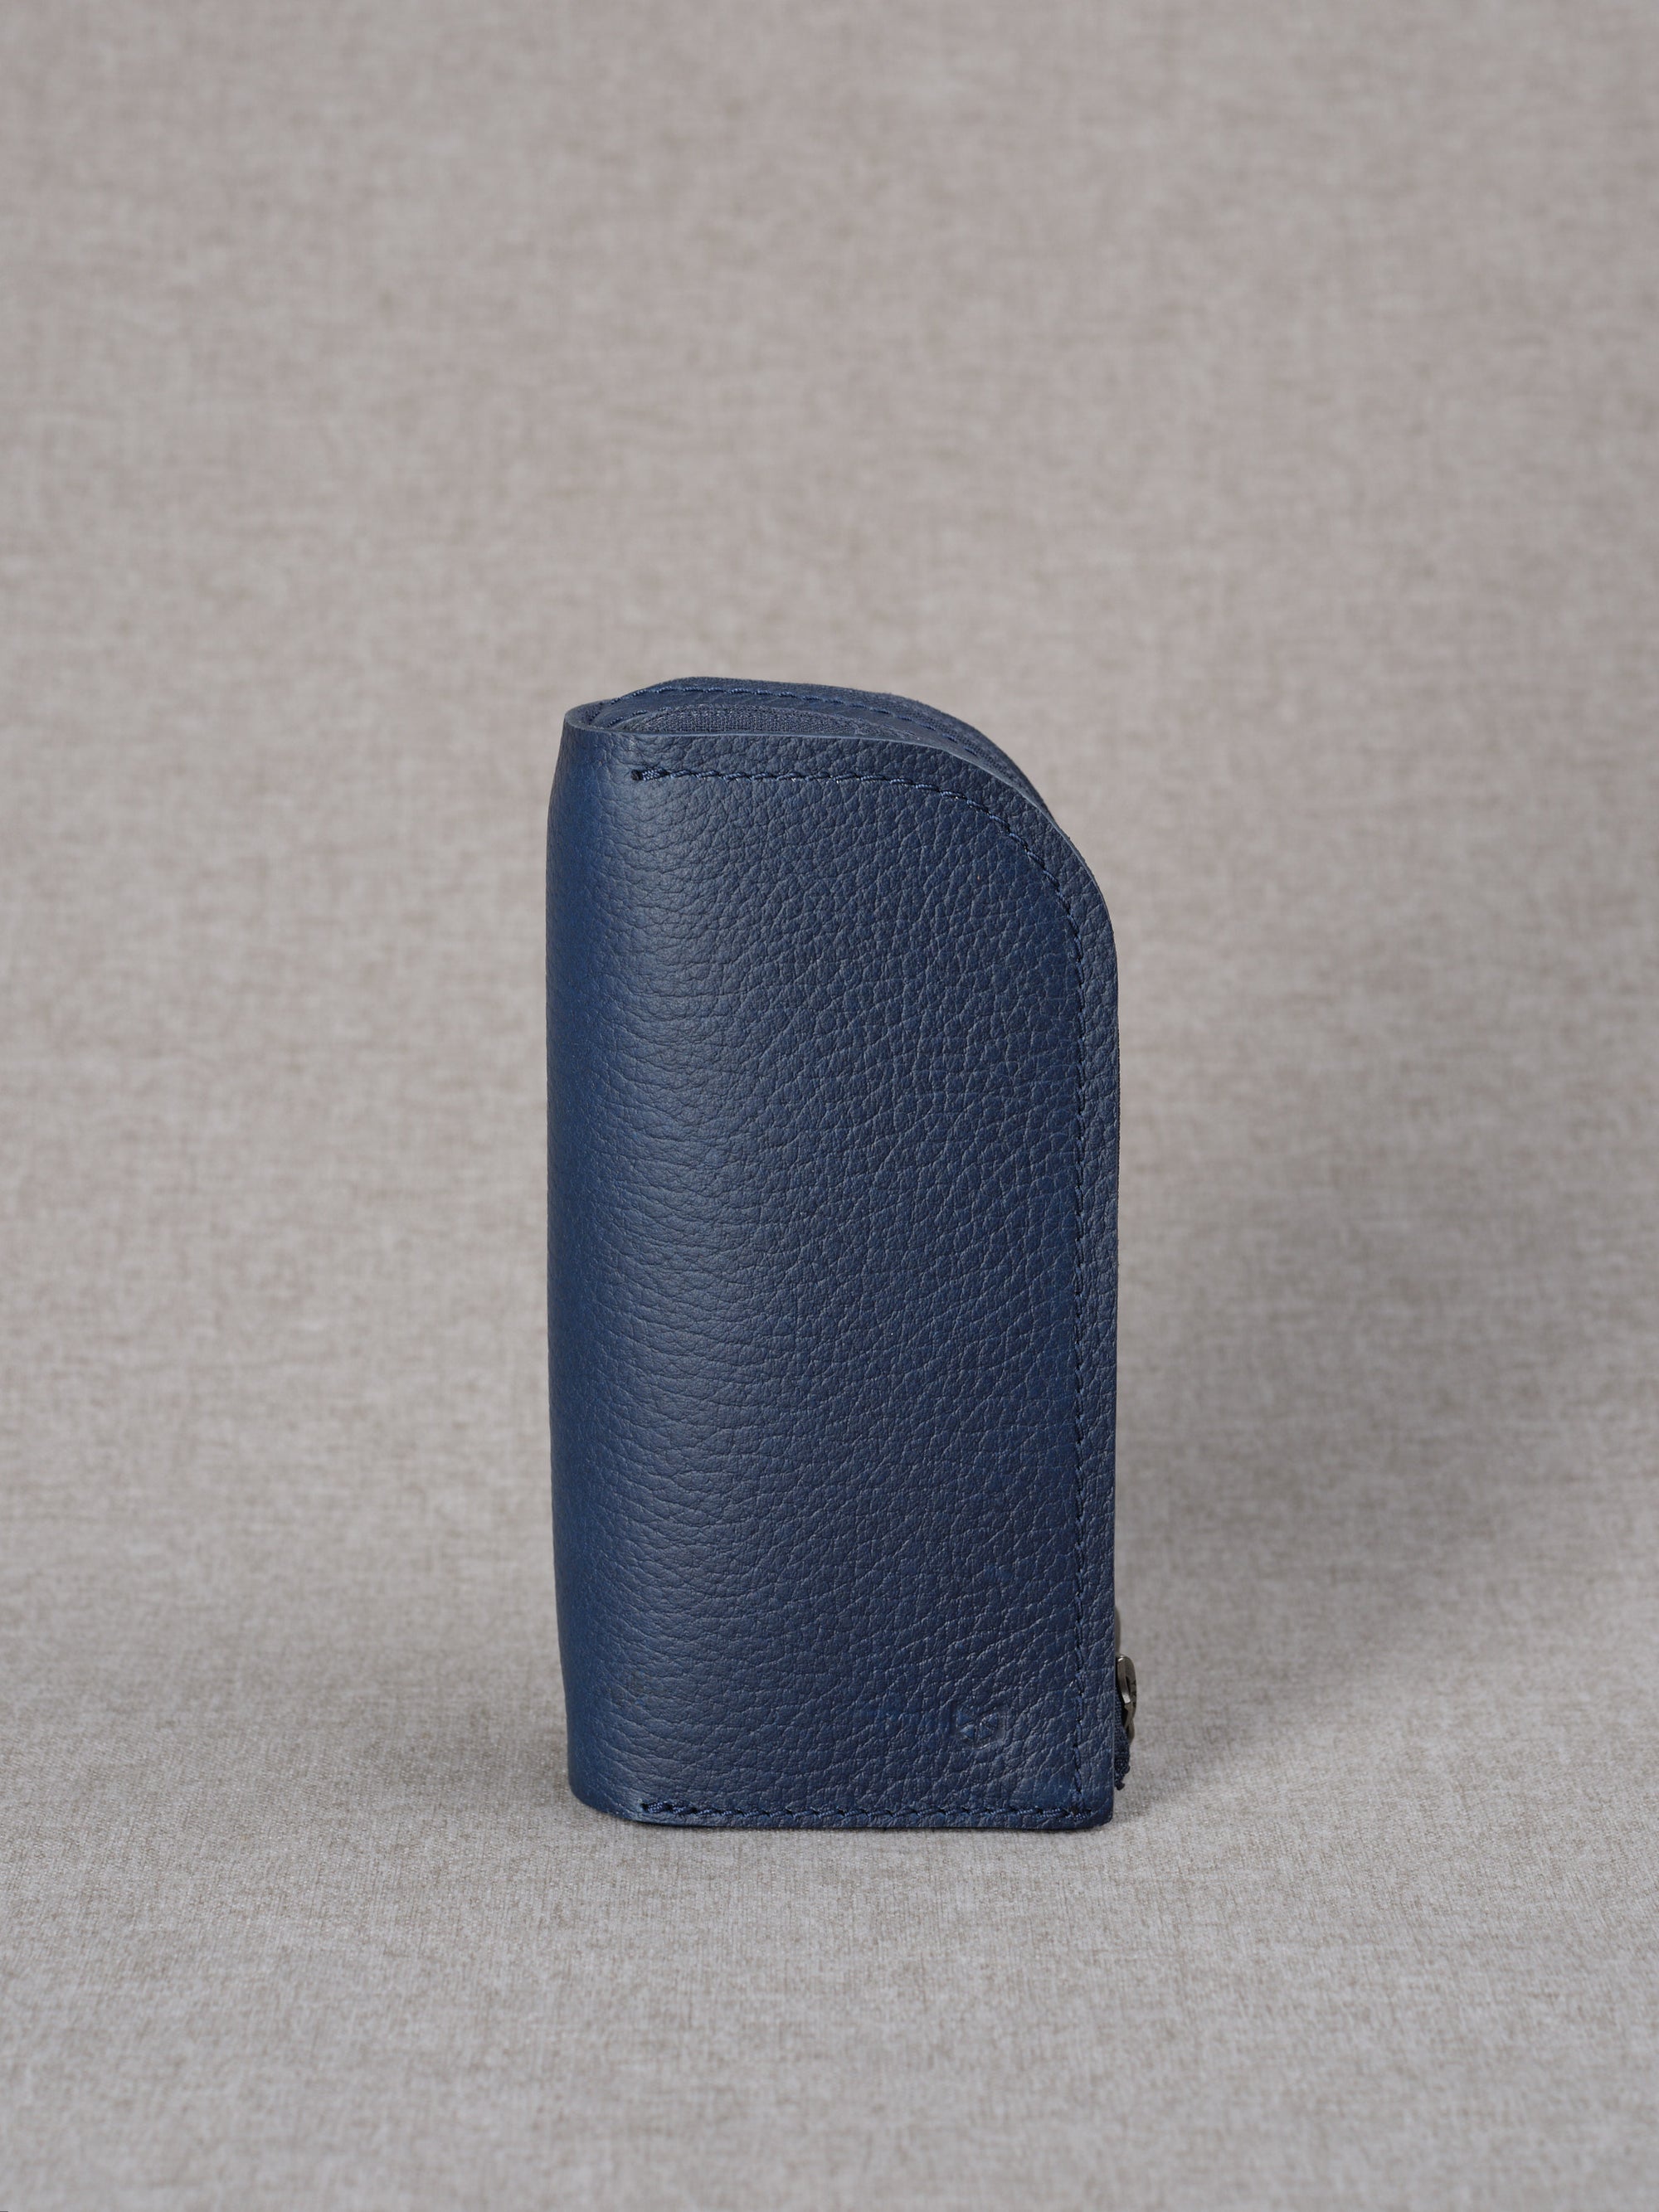 Hard shell sunglasses case navy by Capra Leather